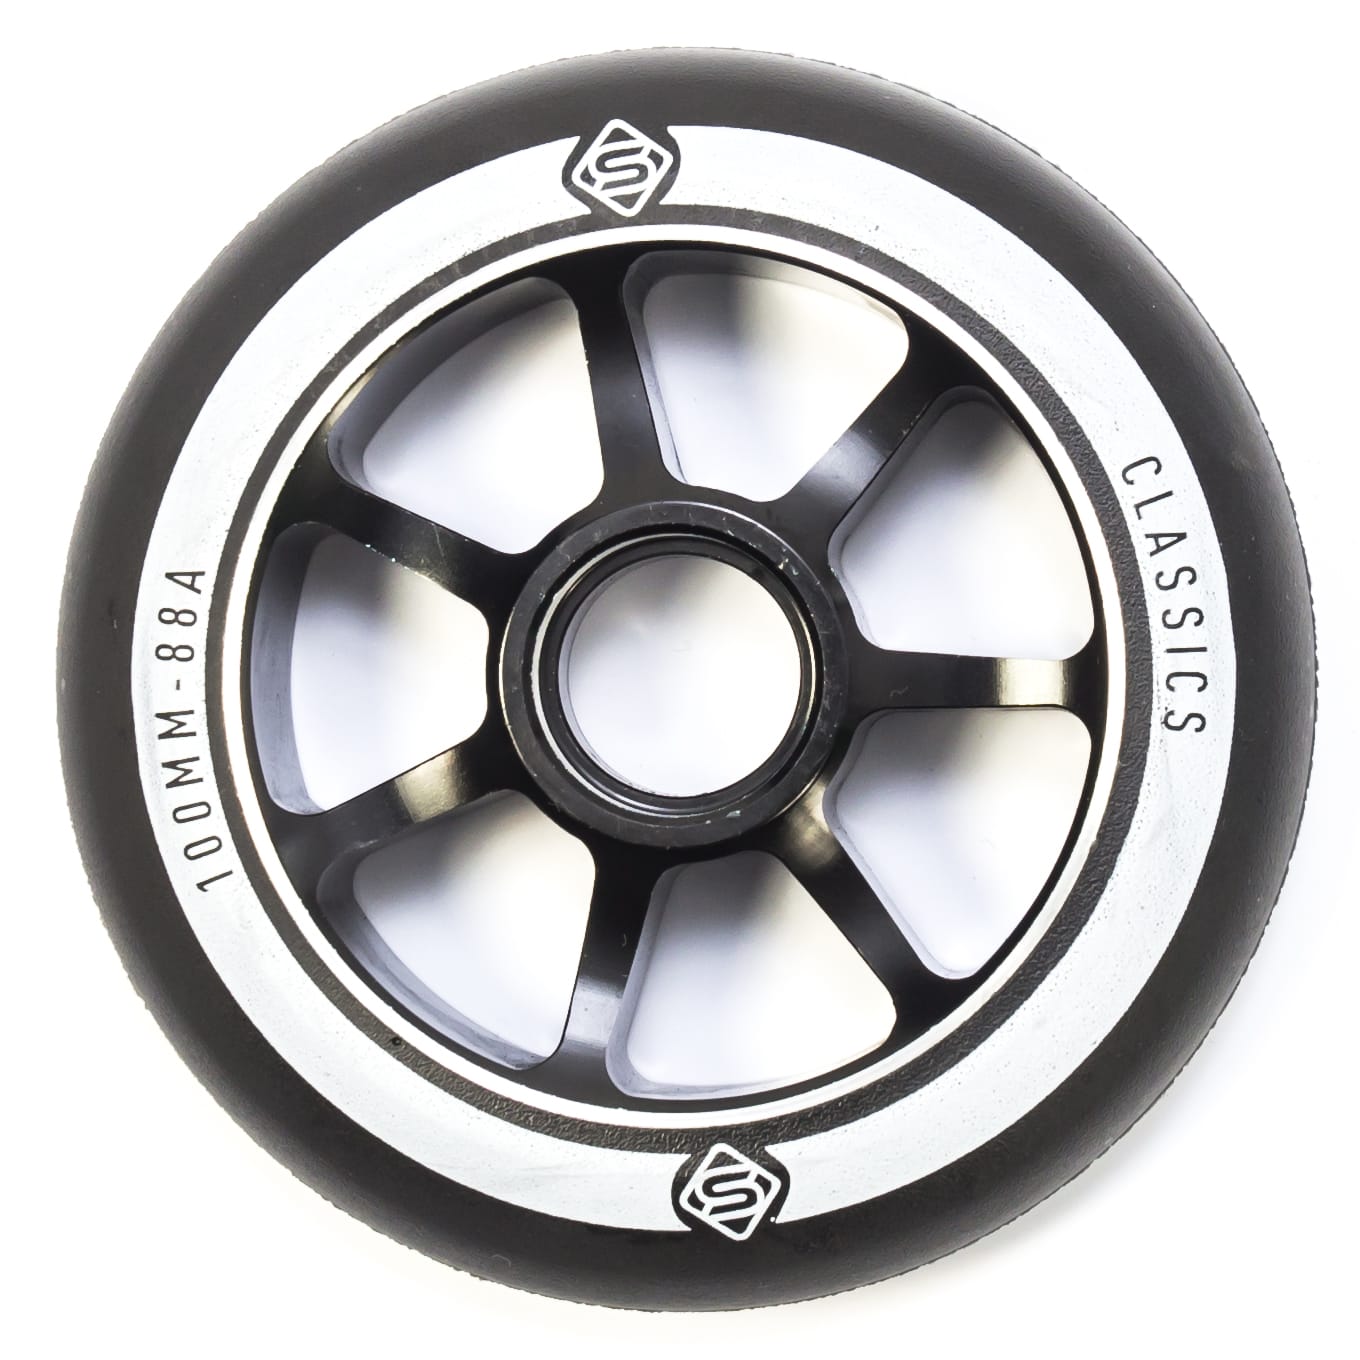 An image of Skates Classic 120mm Stunt Scooter Wheel - Black